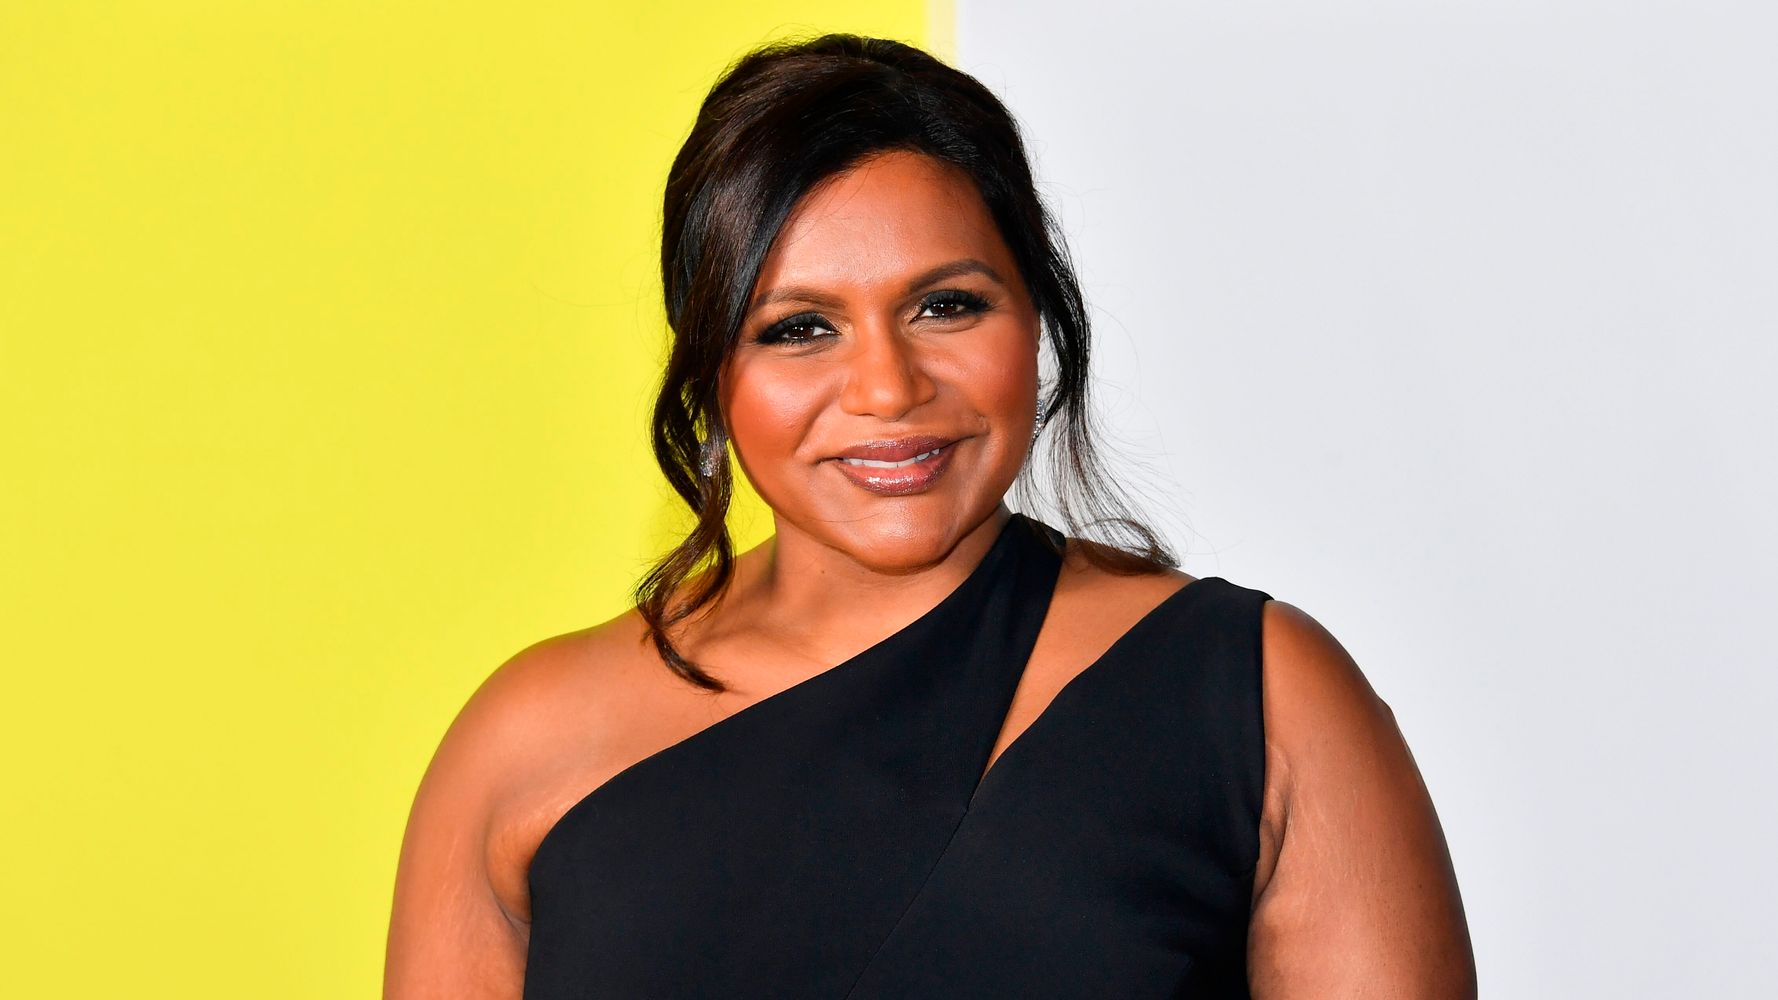 18 Lovely Quotes About Parenthood From Mindy Kaling